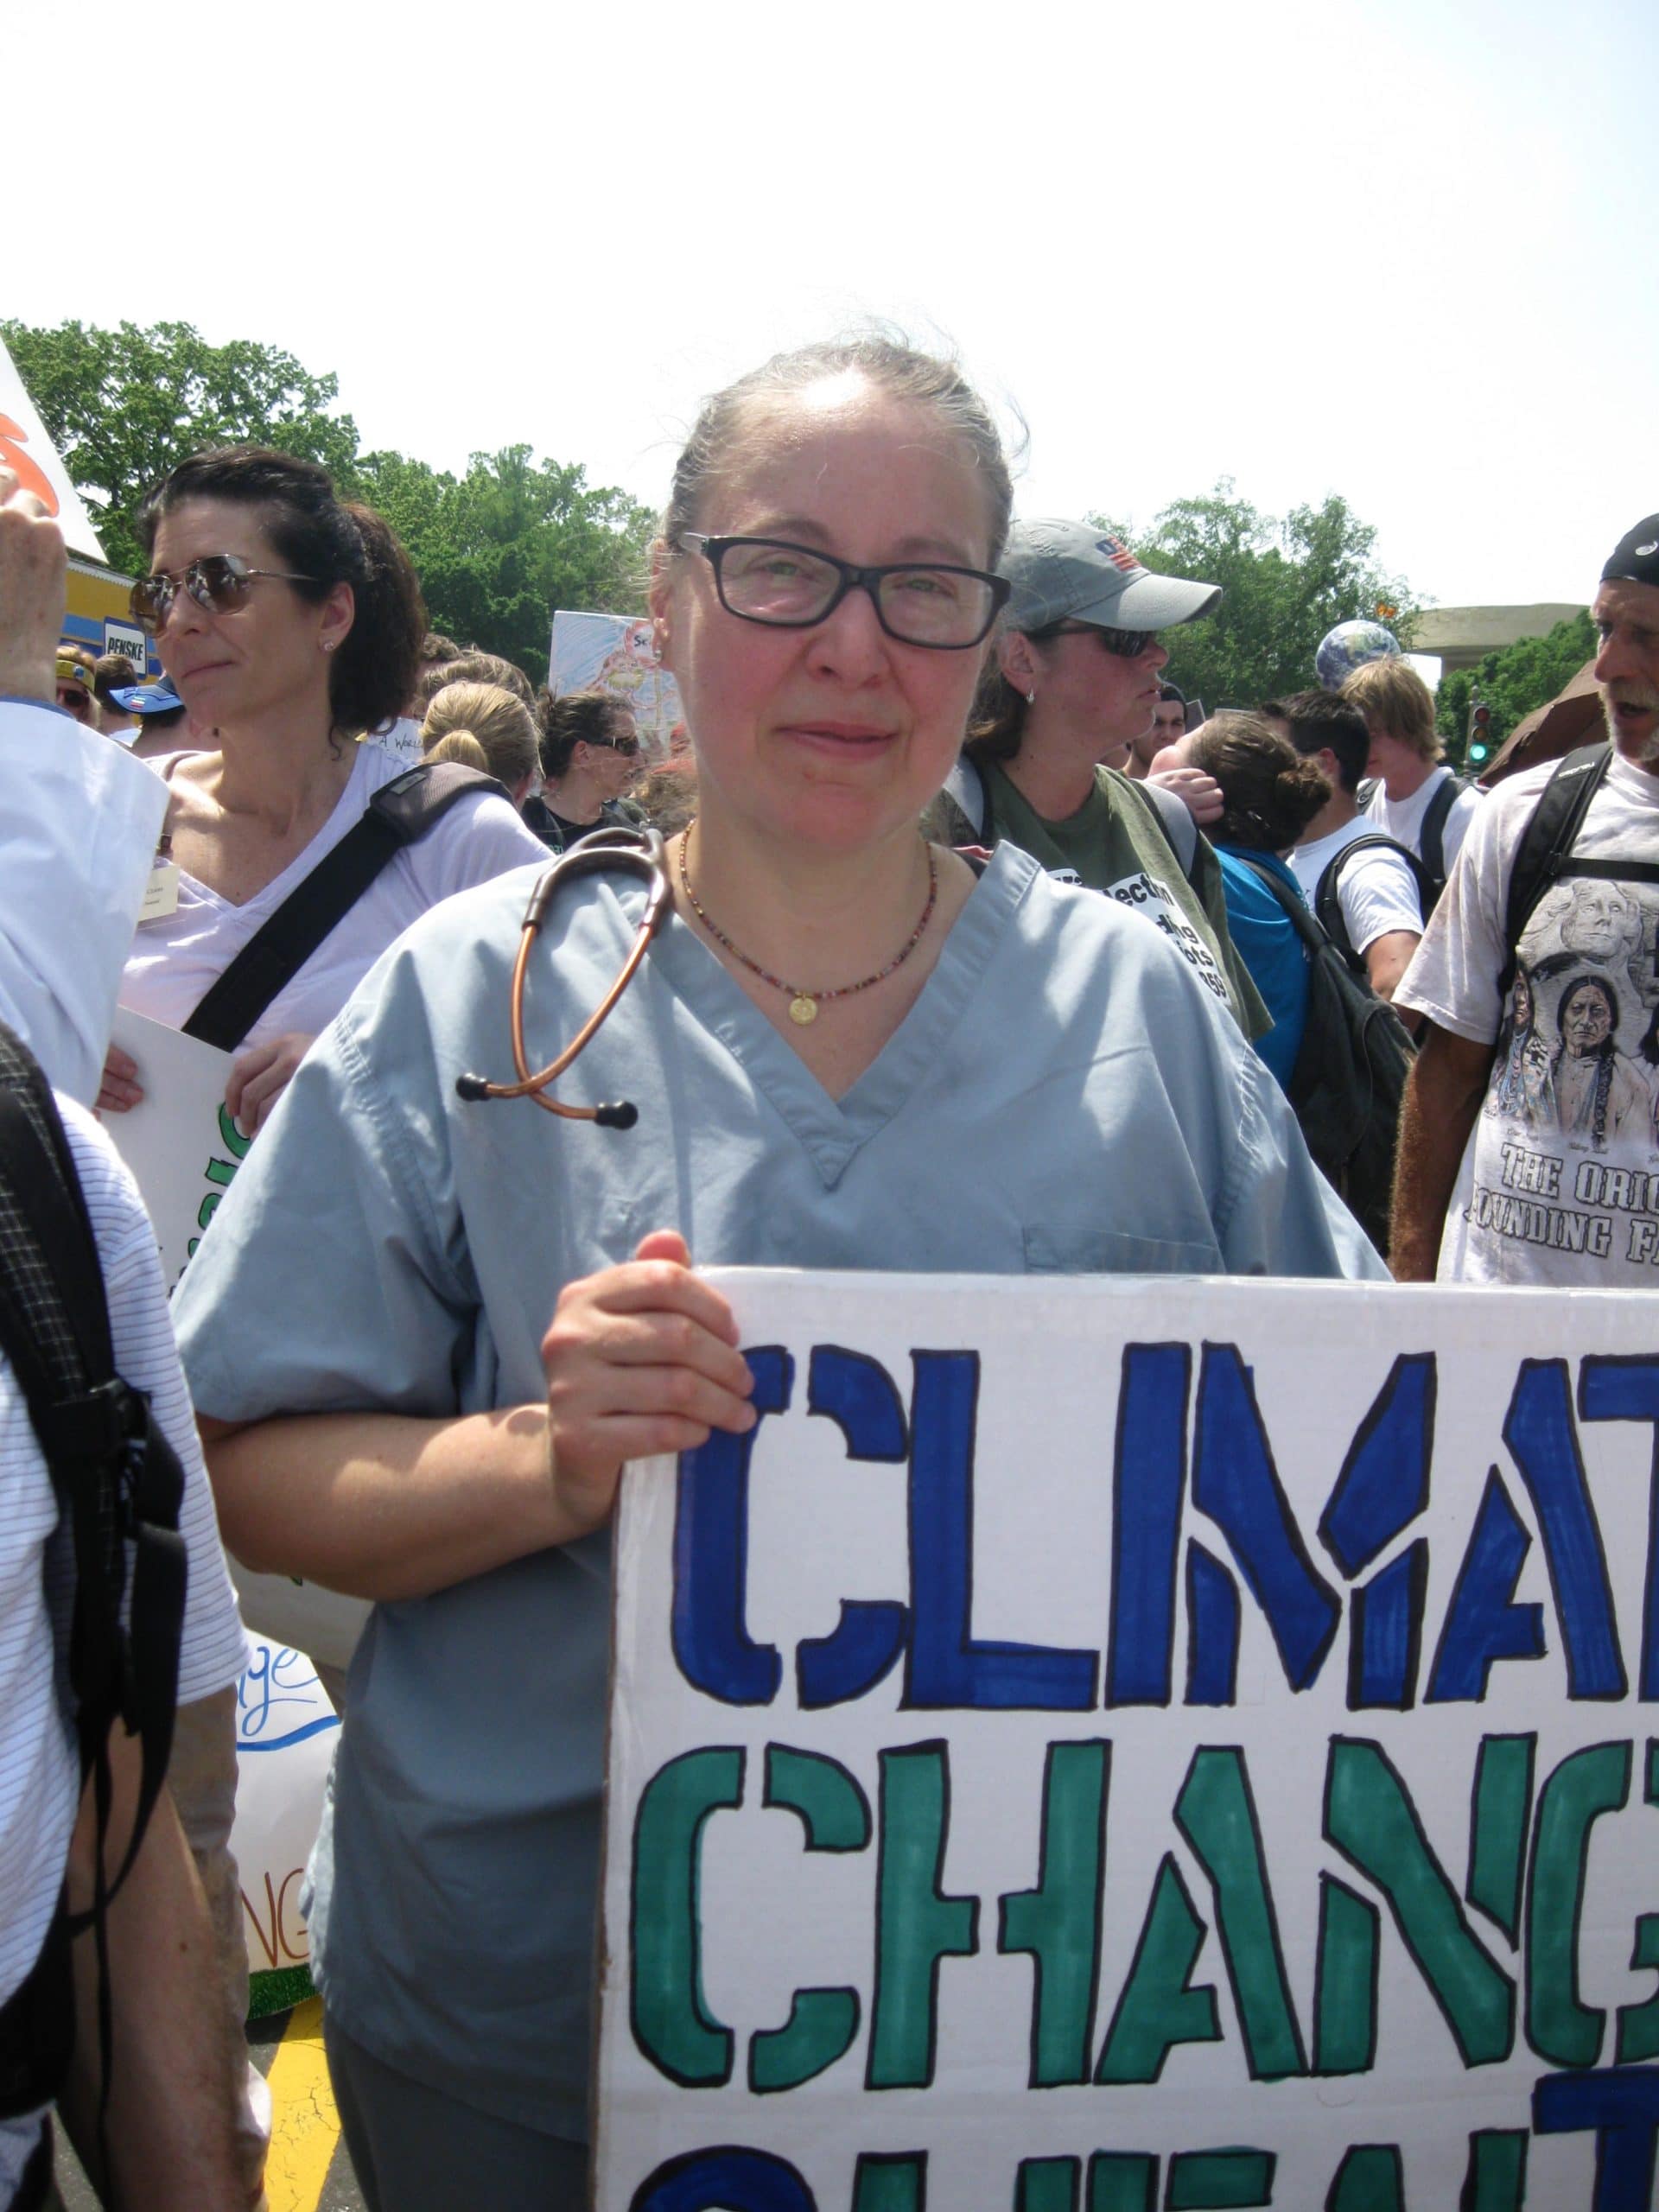 PSR doctor in scrubs holding "Climate Change" sign